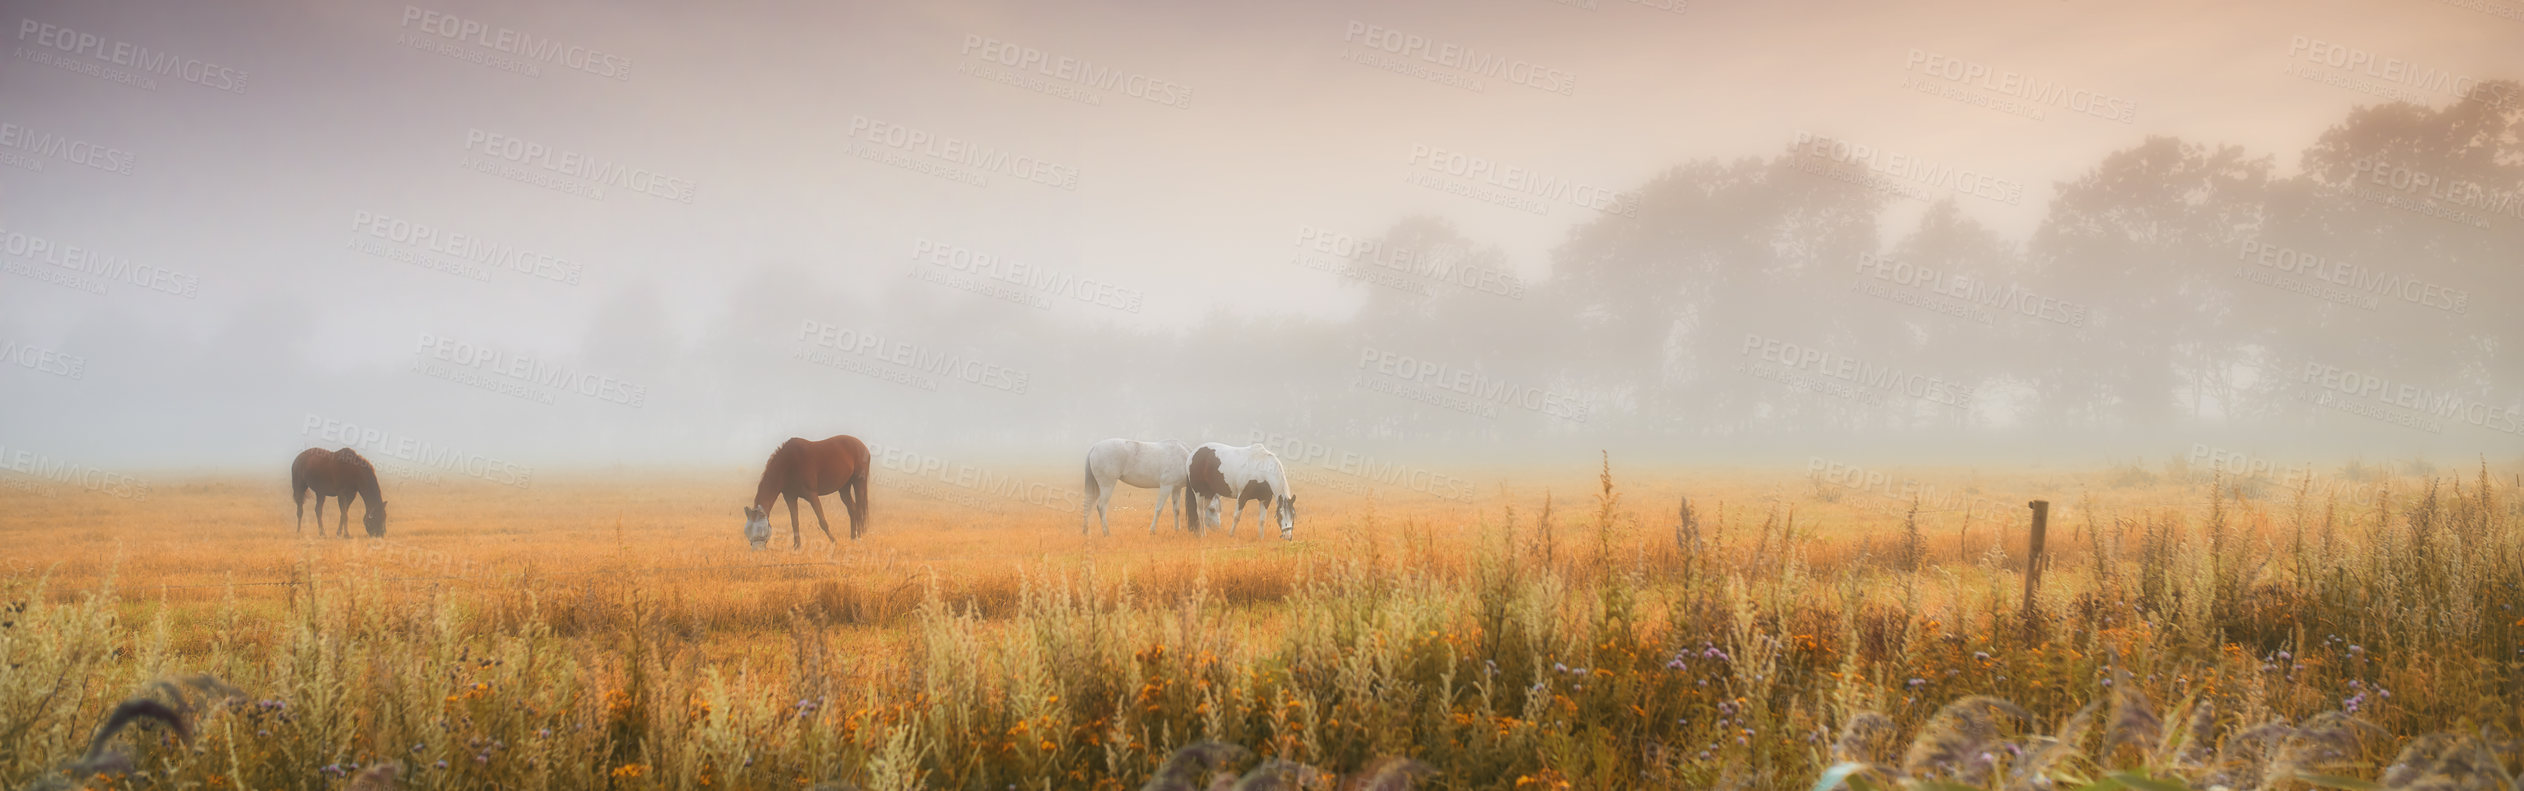 Buy stock photo Three horses grazing together in the distance on a misty field outside with copyspace. Wild animals standing on farm land with copy space. Ponies eating on a lush spring landscape on rural farm land